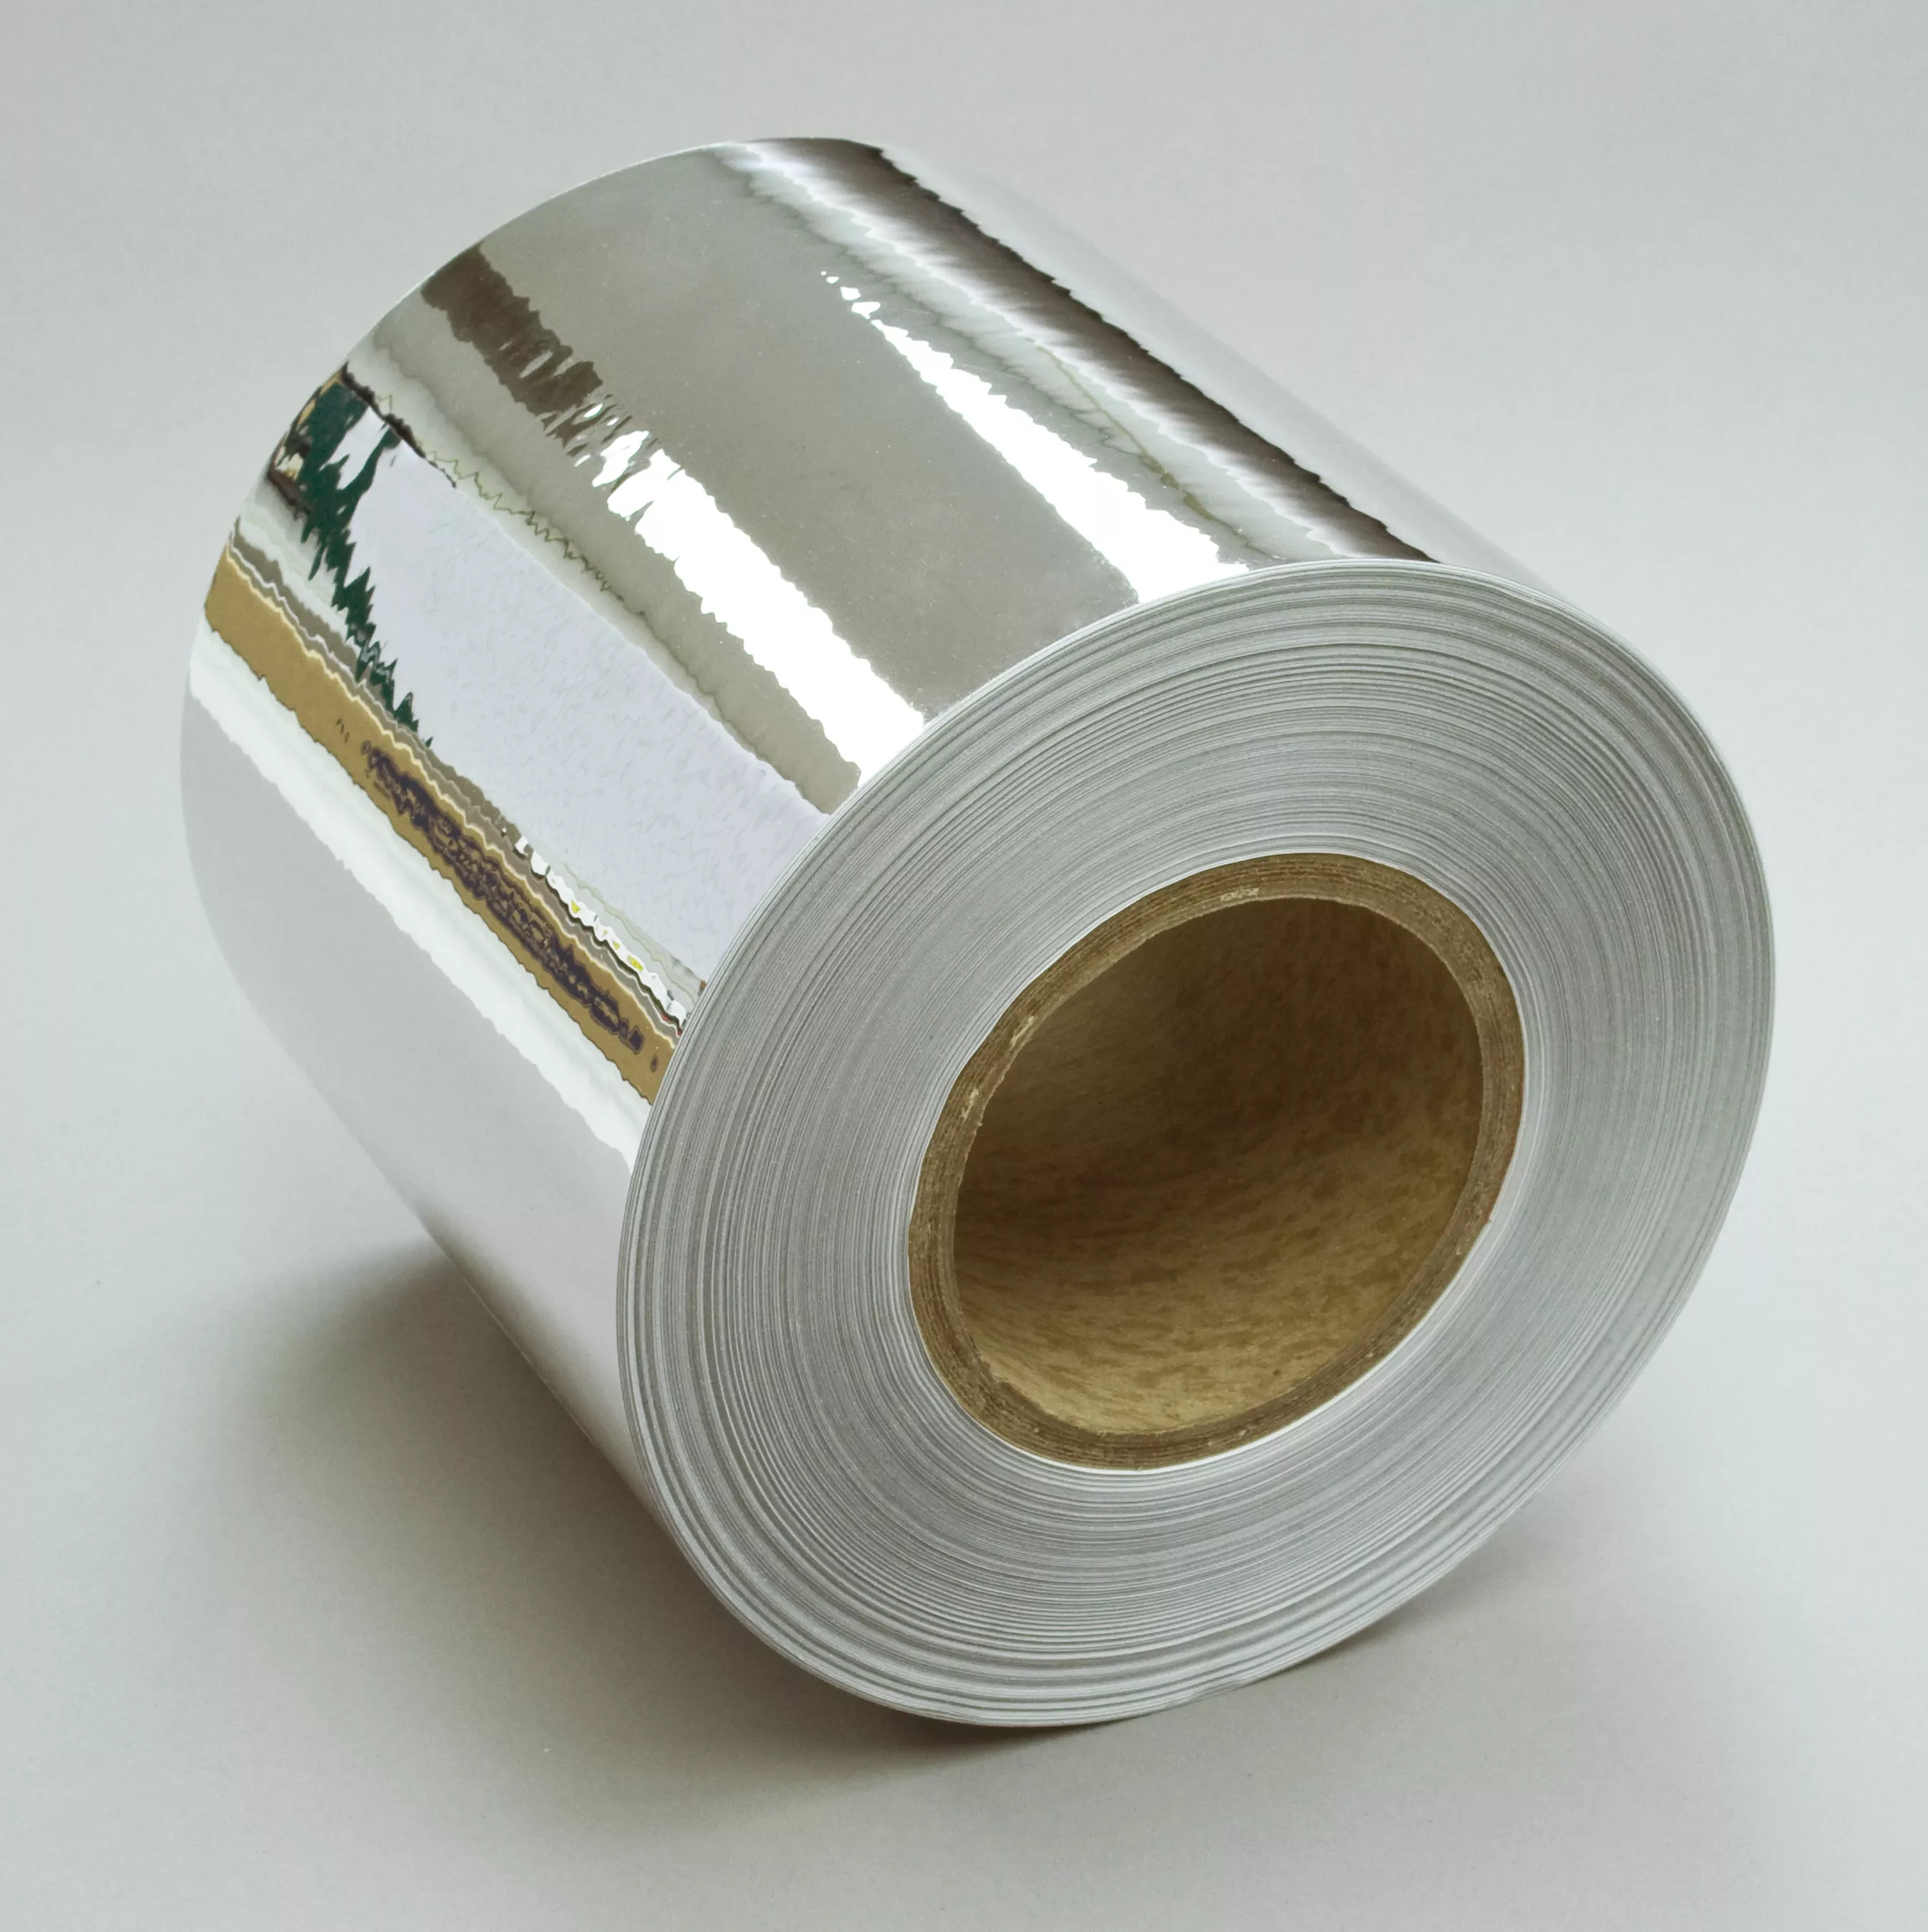 3M™ Sheet and Screen Label Material 7903, Glossy Silver Polyester, 508 mm x 686 mm, 100 Sheet/Case